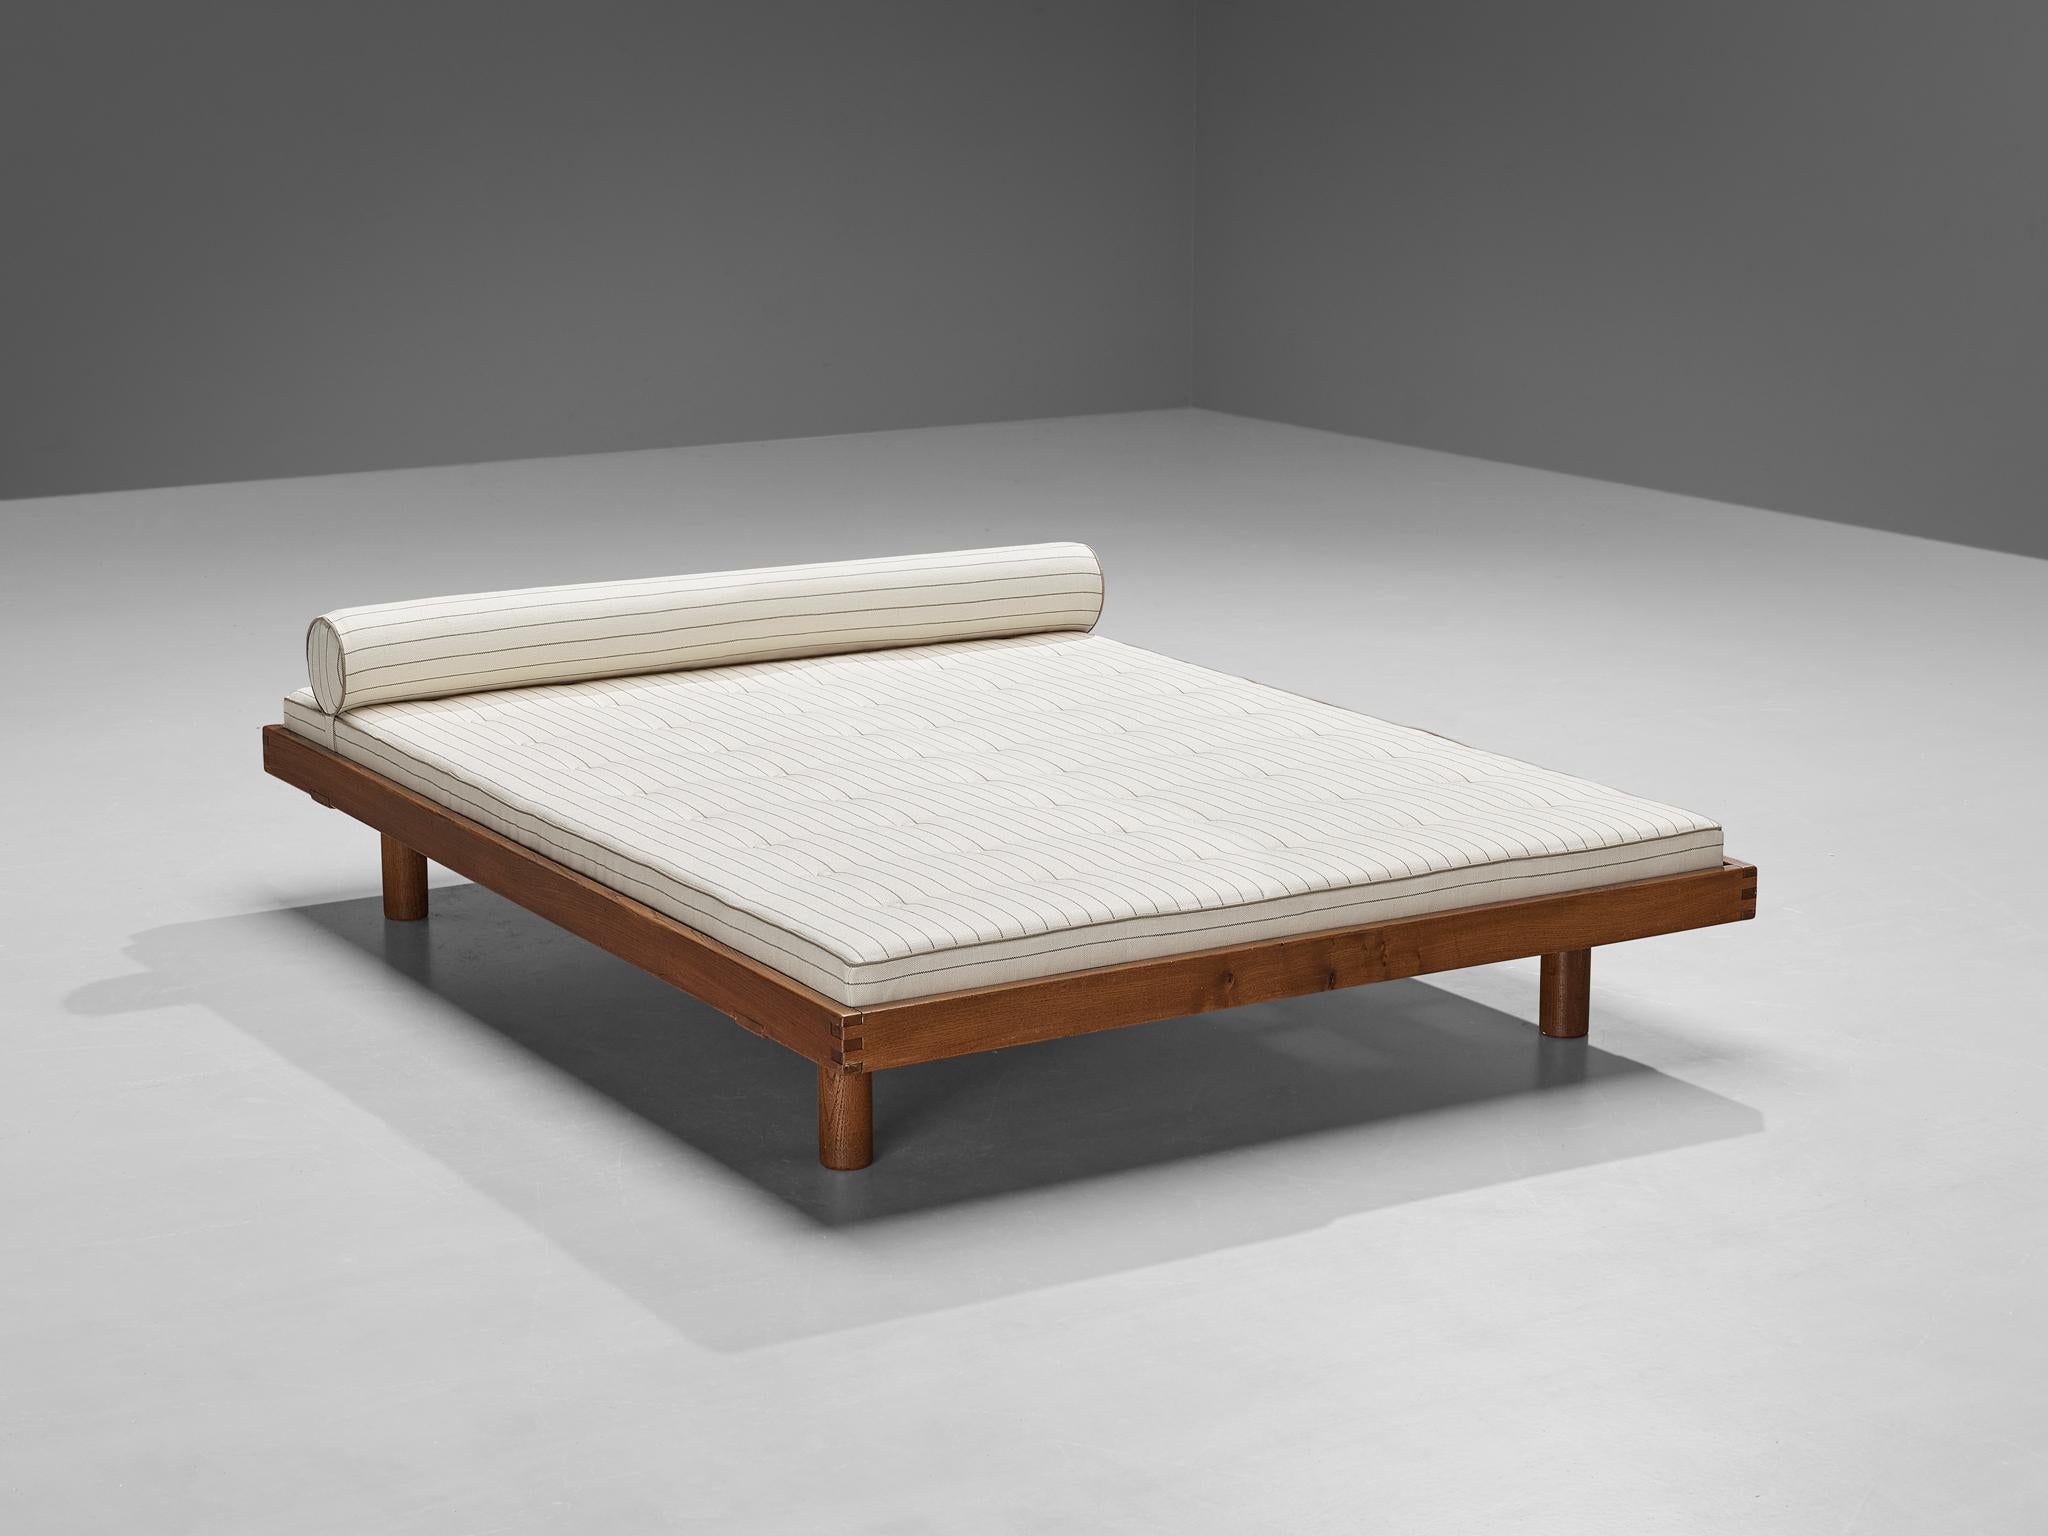 Pierre Chapo, “Godot” L01I daybed, elm and fabric, France, 1965

This design is an early edition, created according to the original craft methodology of Pierre Chapo. The L01 bed by Pierre Chapo is characterized for its taut, sober design with